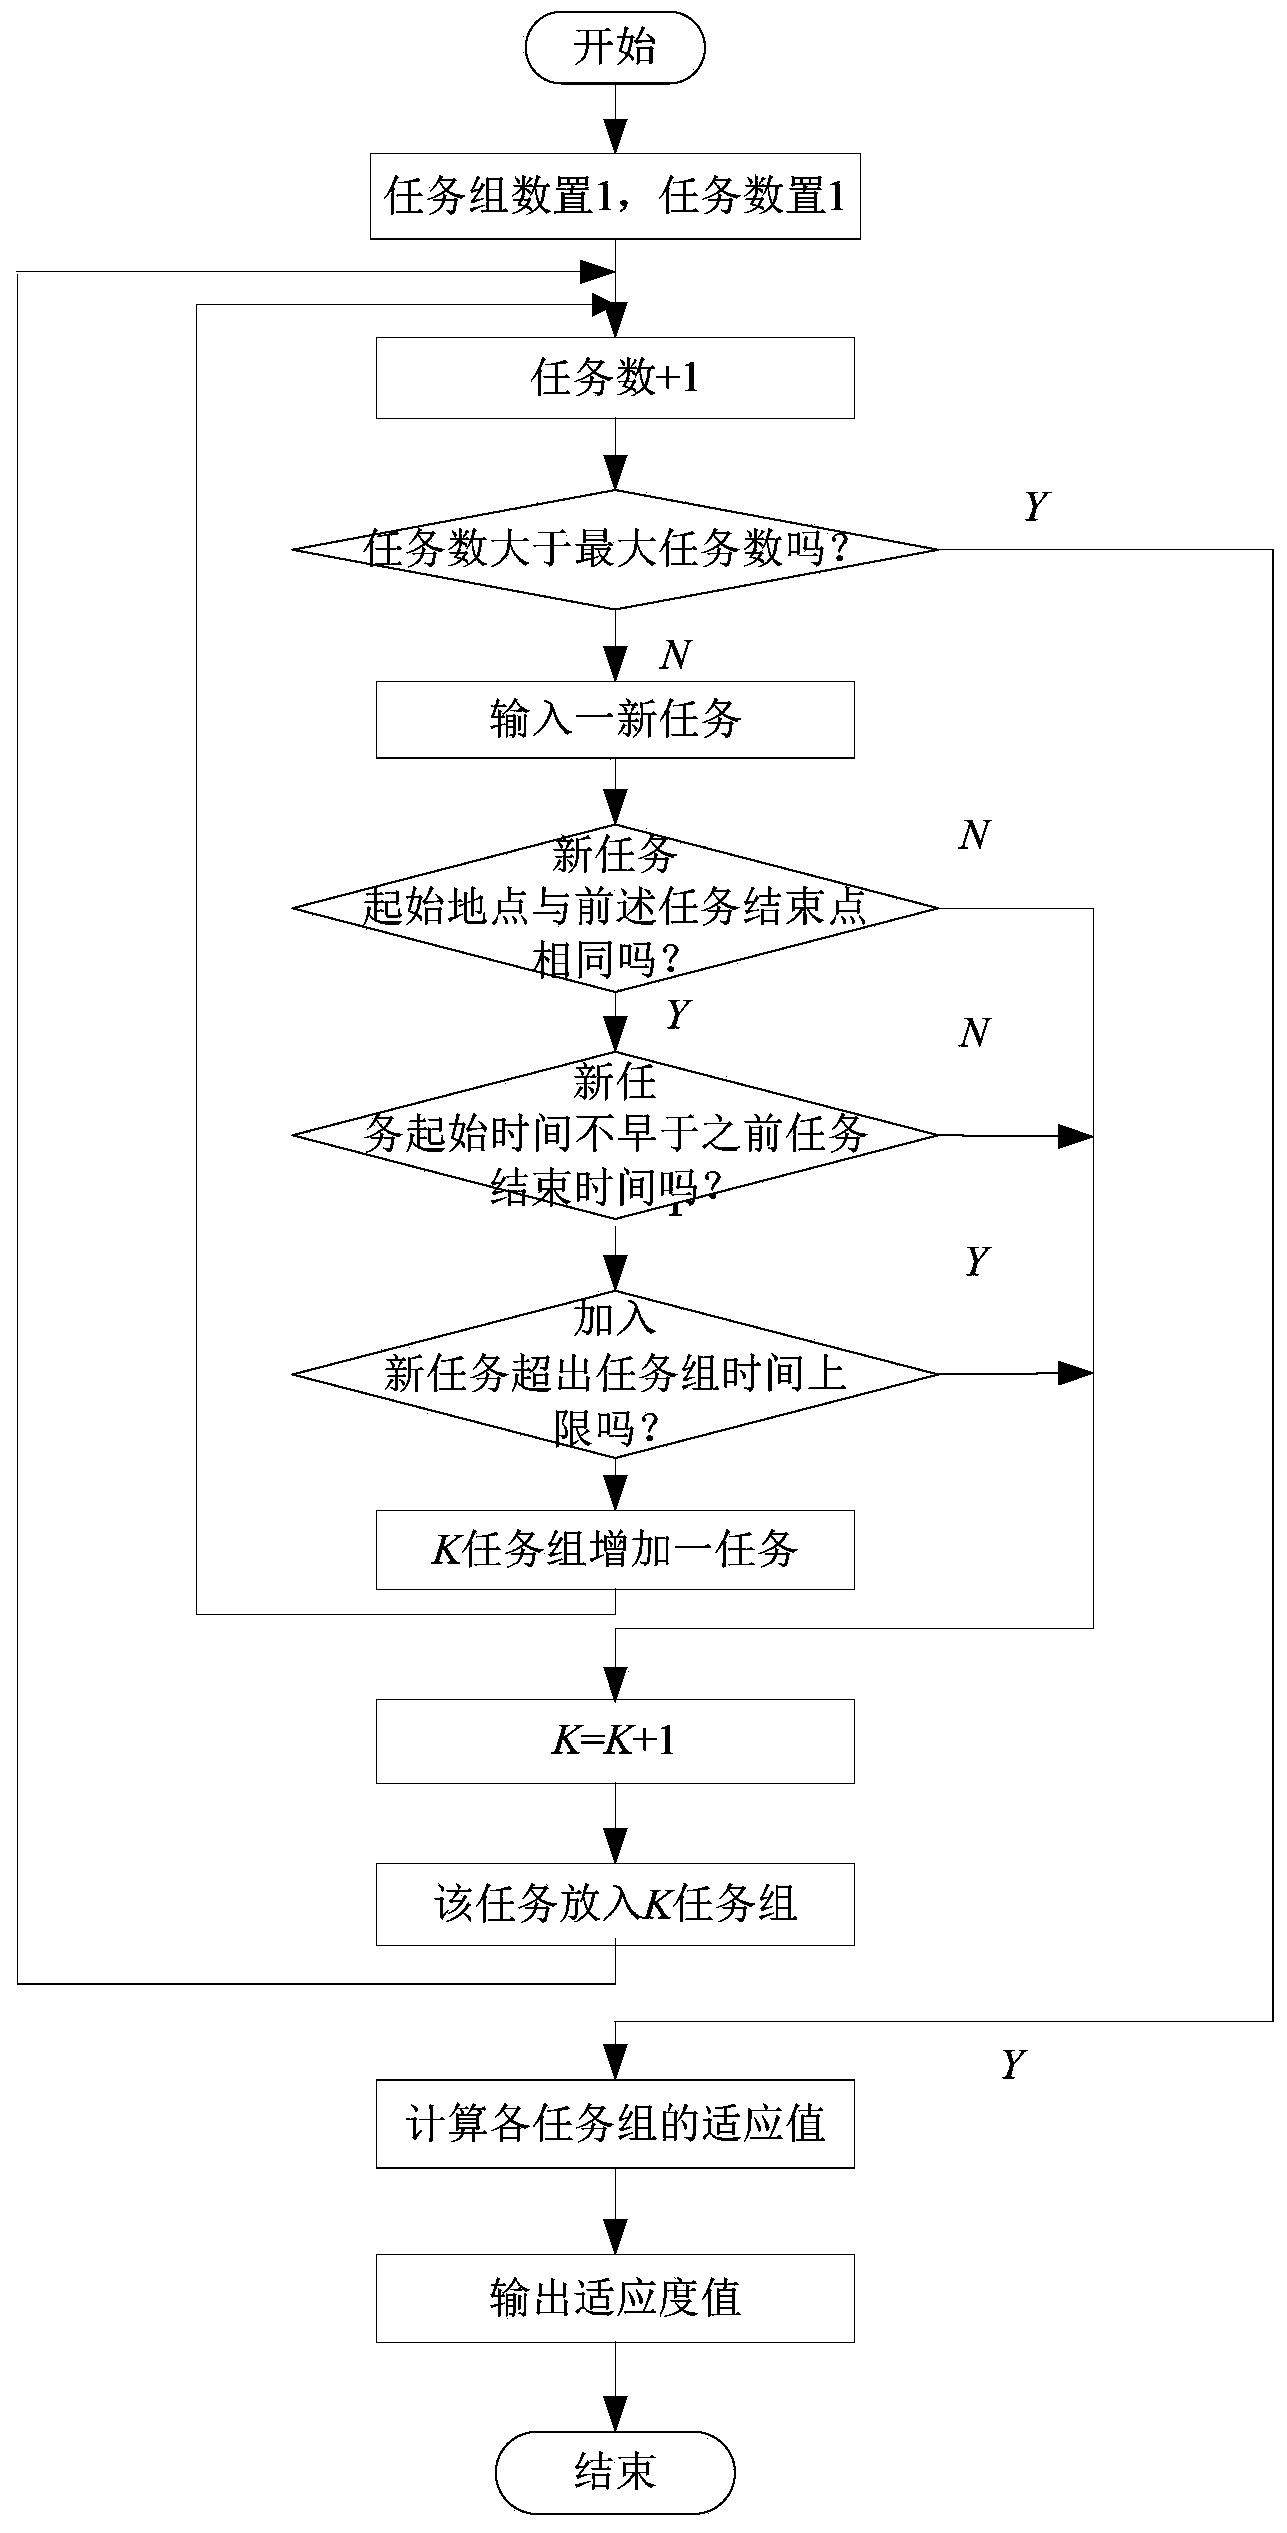 Ship piloting and scheduling method based on improved discrete particle swarm optimization algorithm